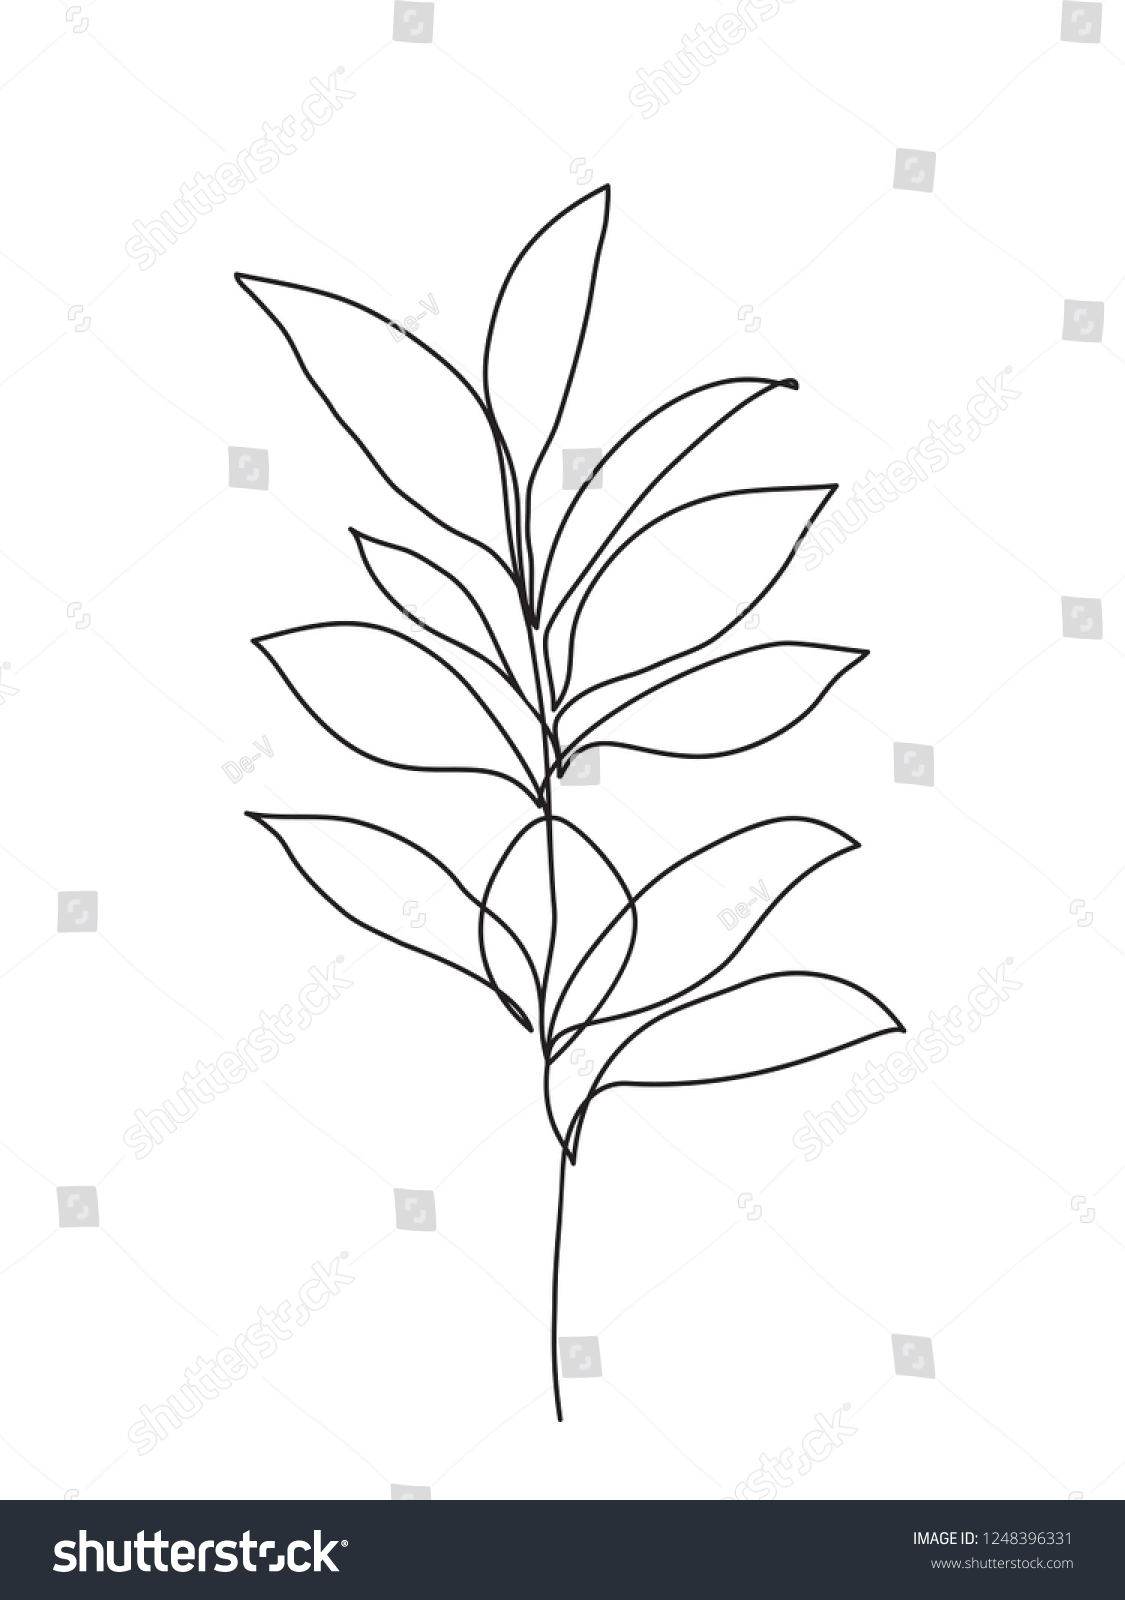 Botanical Leaves One Line Drawing Art Stock Vector (Royalty Free ...